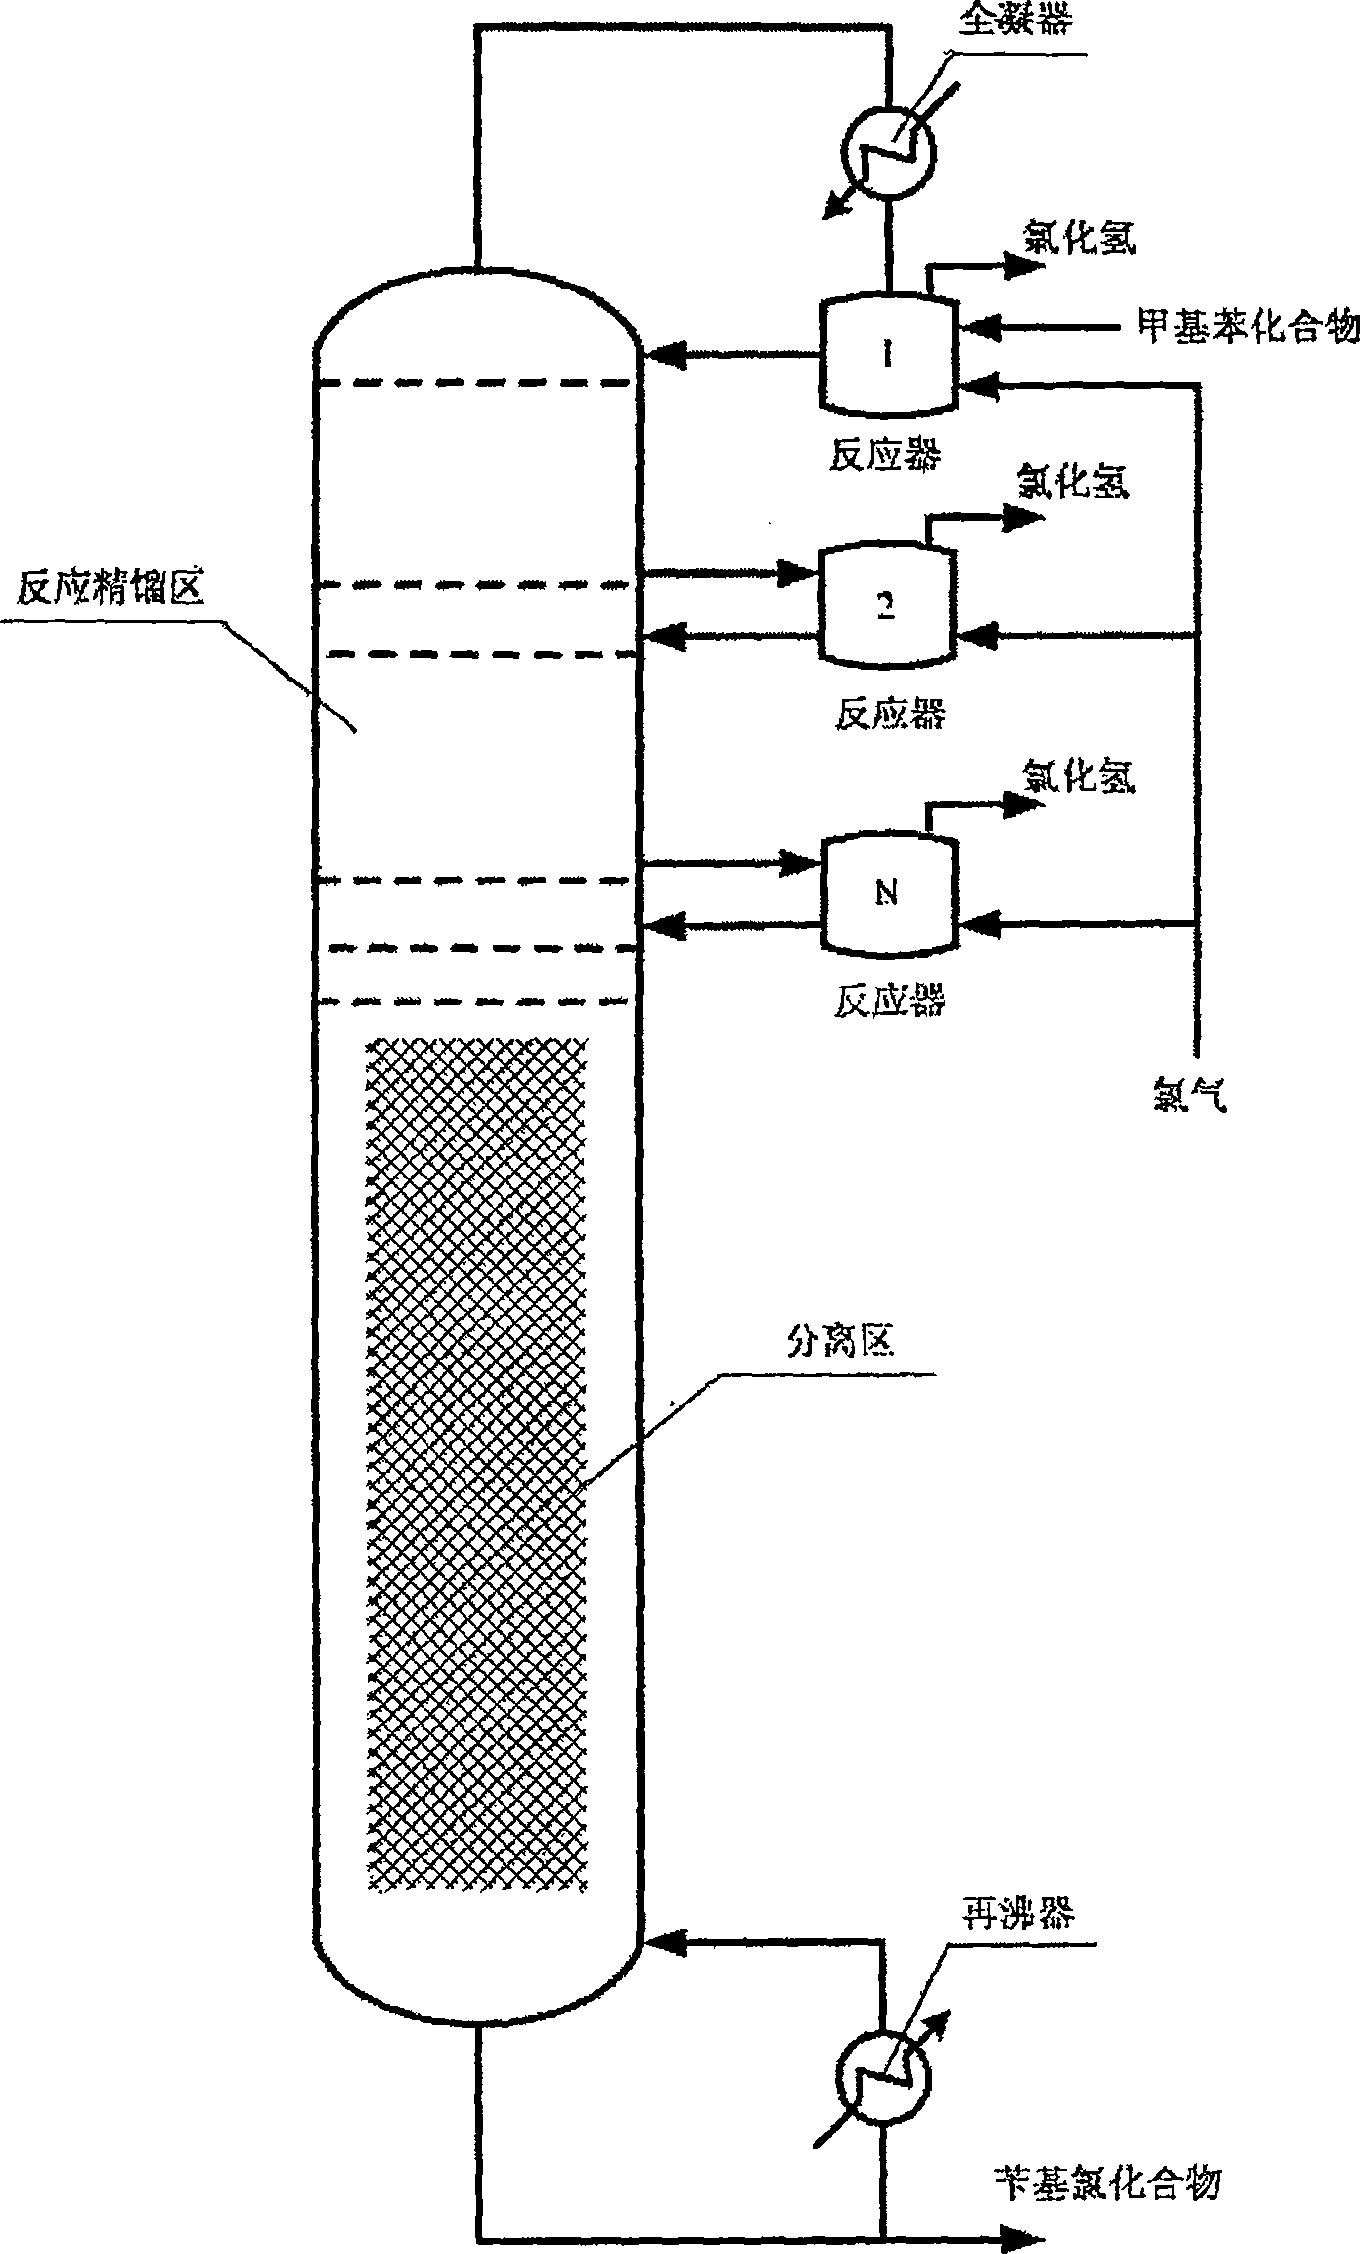 Process for producing benzyl chlorides chemical compound